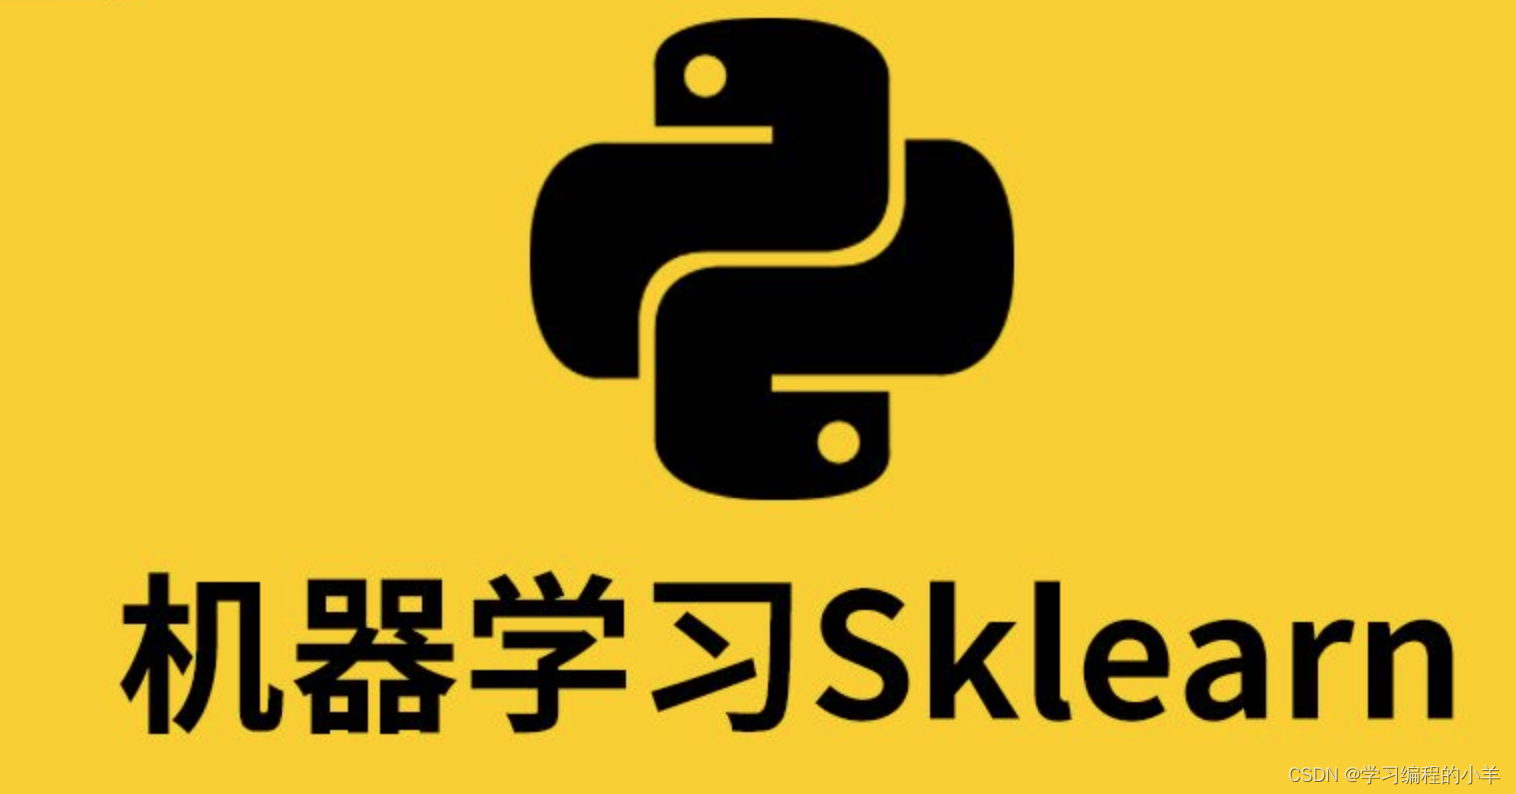 sklearn<span style='color:red;'>基础</span><span style='color:red;'>教程</span>：机器<span style='color:red;'>学习</span>模型的构建与<span style='color:red;'>评估</span>